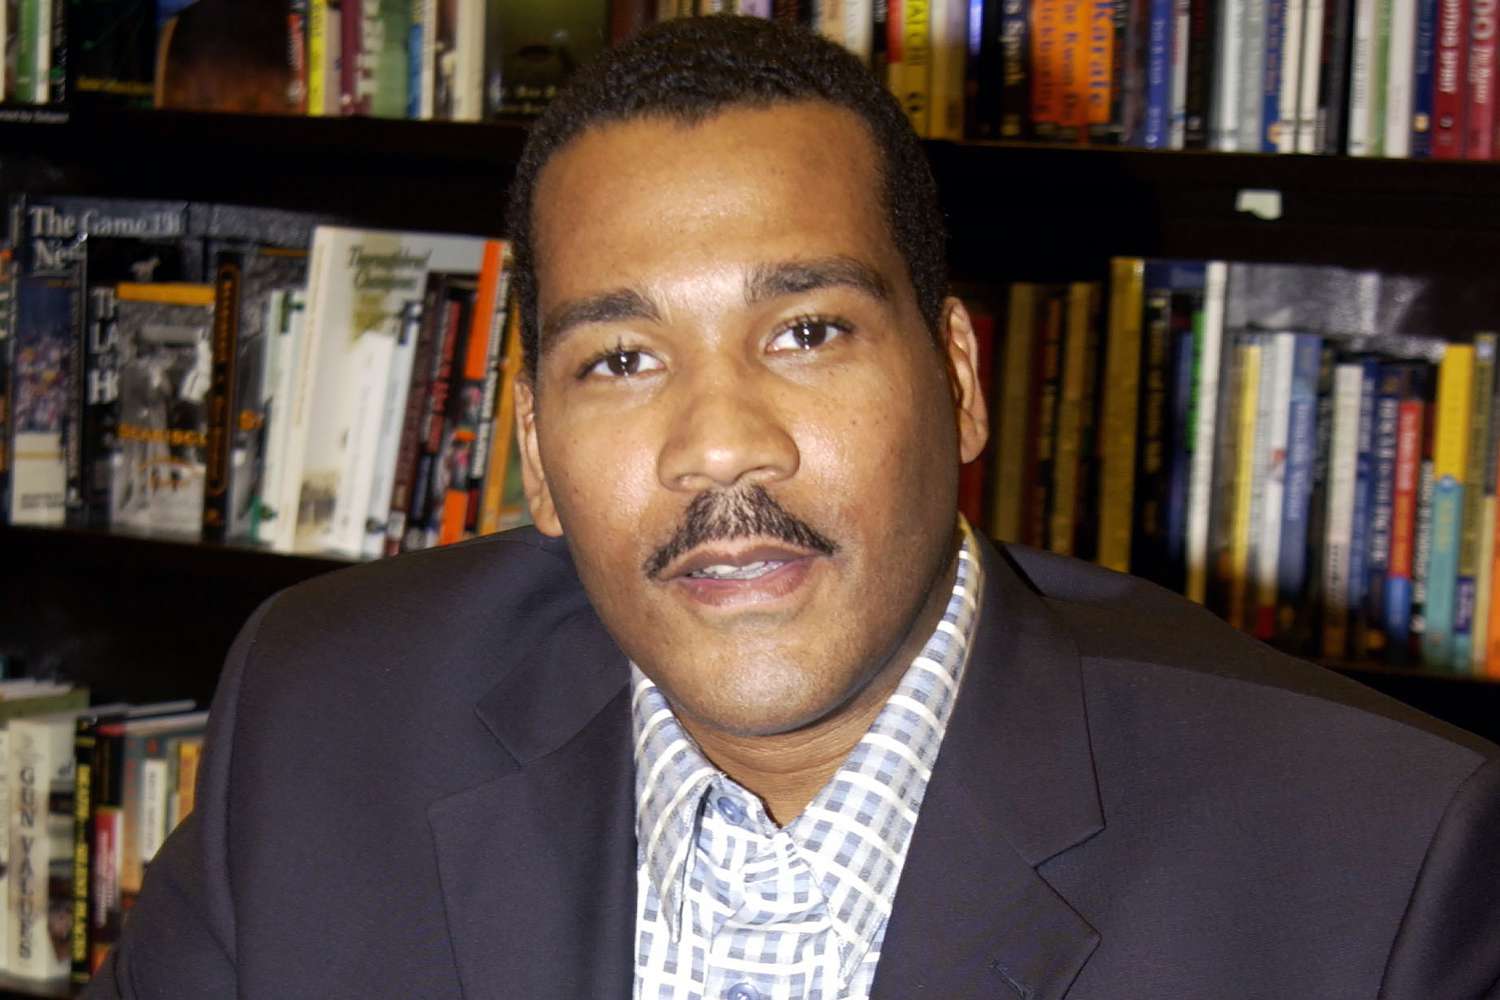 Dexter Scott King, Son Of Martin Luther King Jr., Passes Away At 62